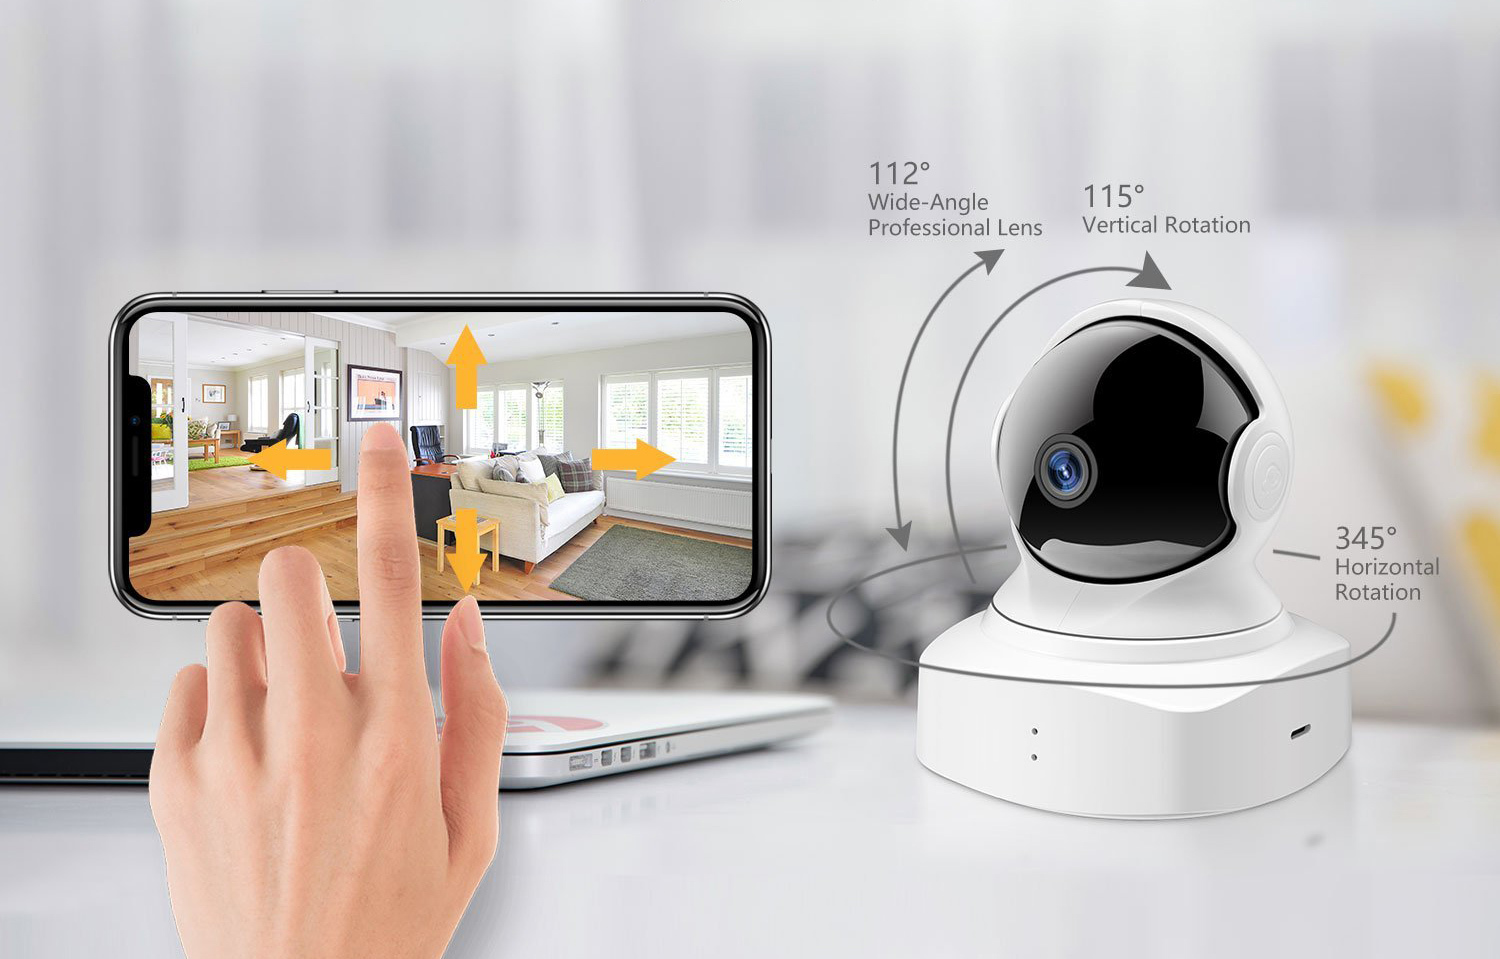 How to Protect Your Home With Hidden Security Cameras?